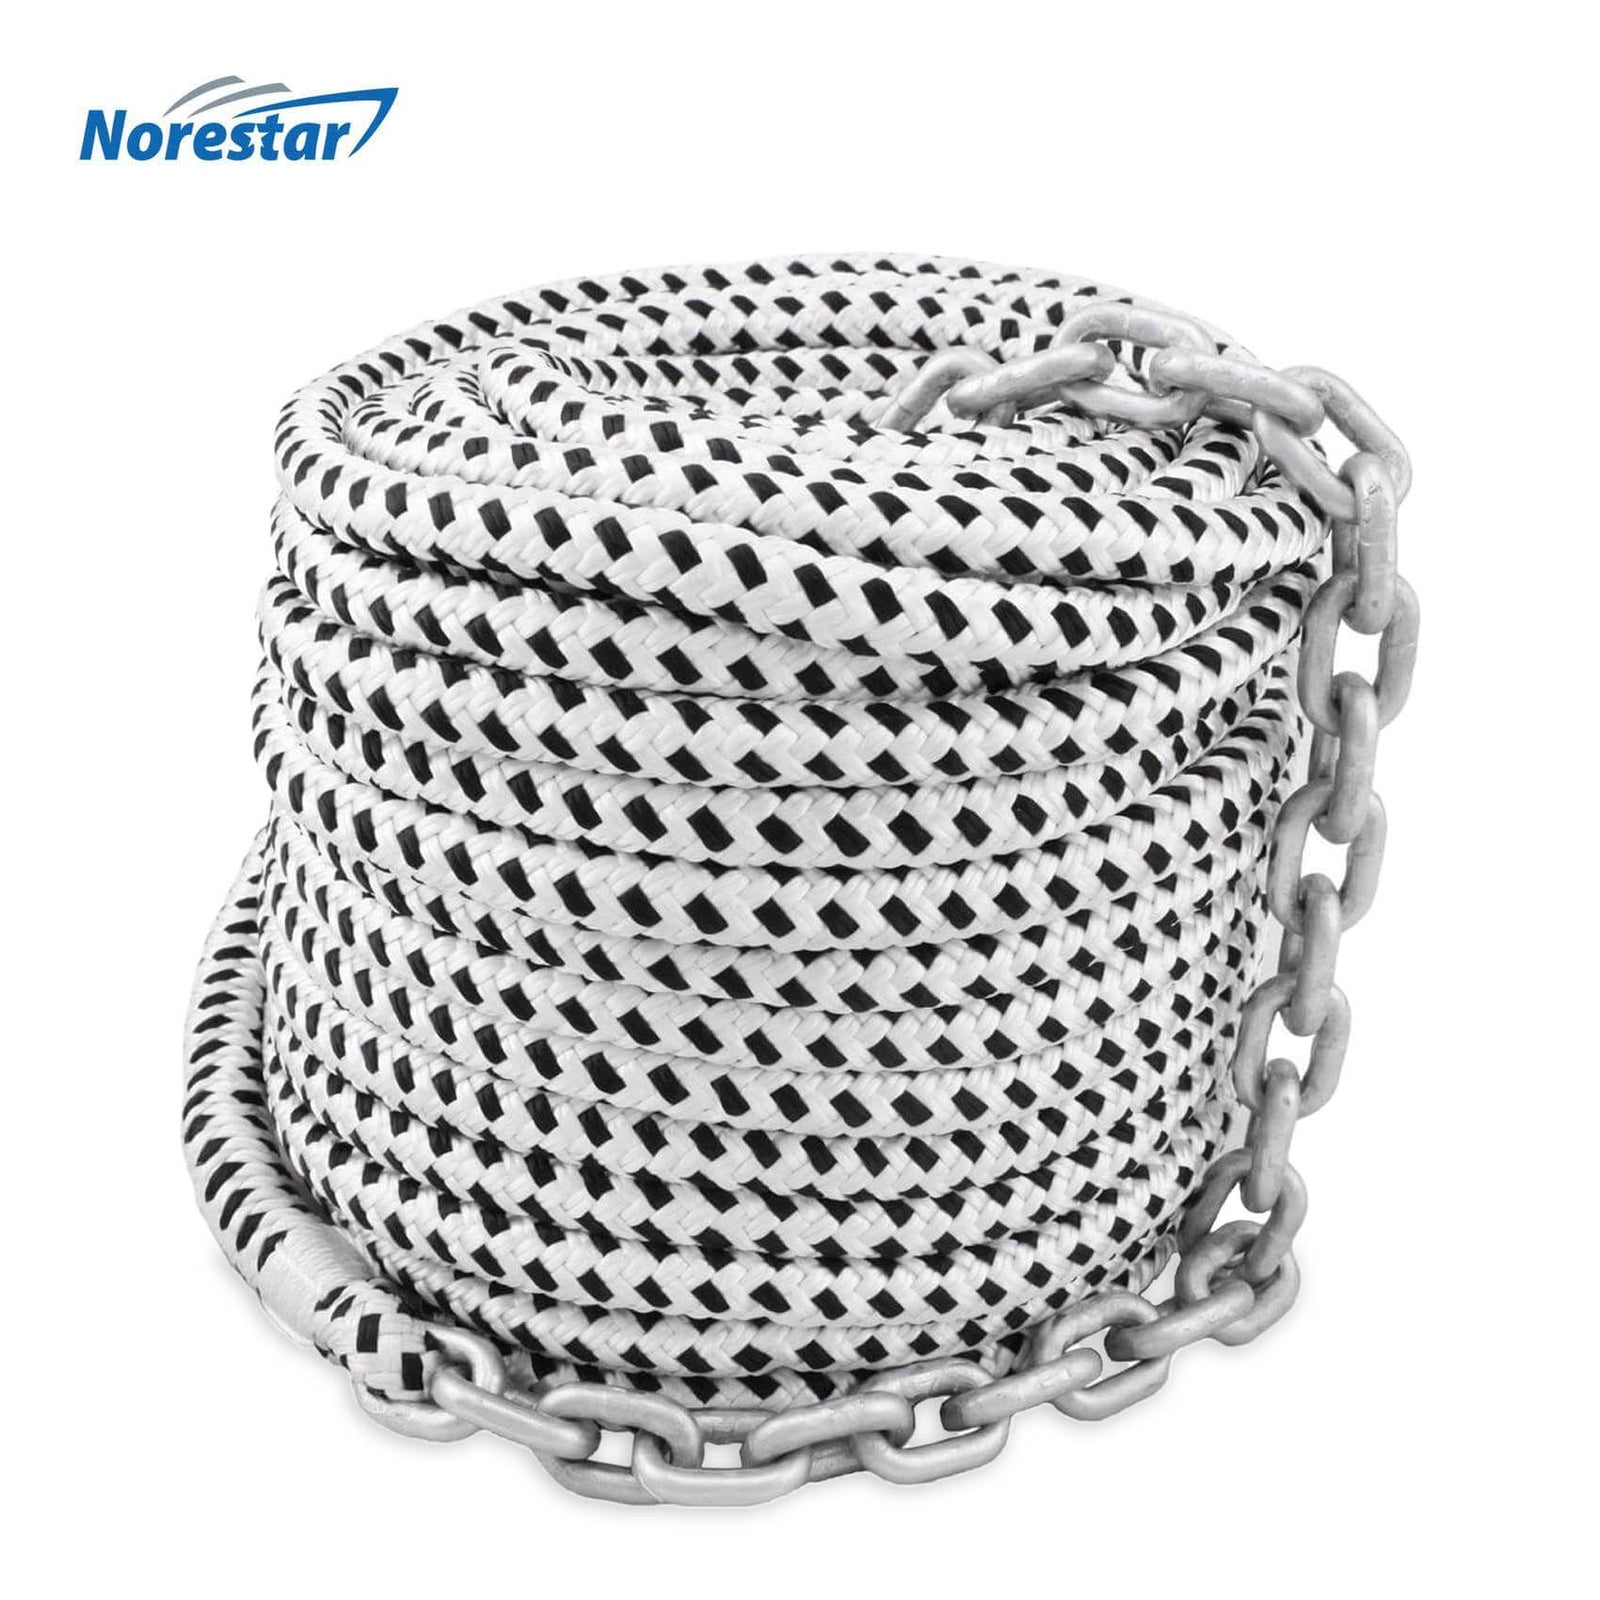 Norestar Double-Braided Nylon Anchor Rode (Windlass Rode): Anchor Rope Pre-Spliced with HT G4 Chain